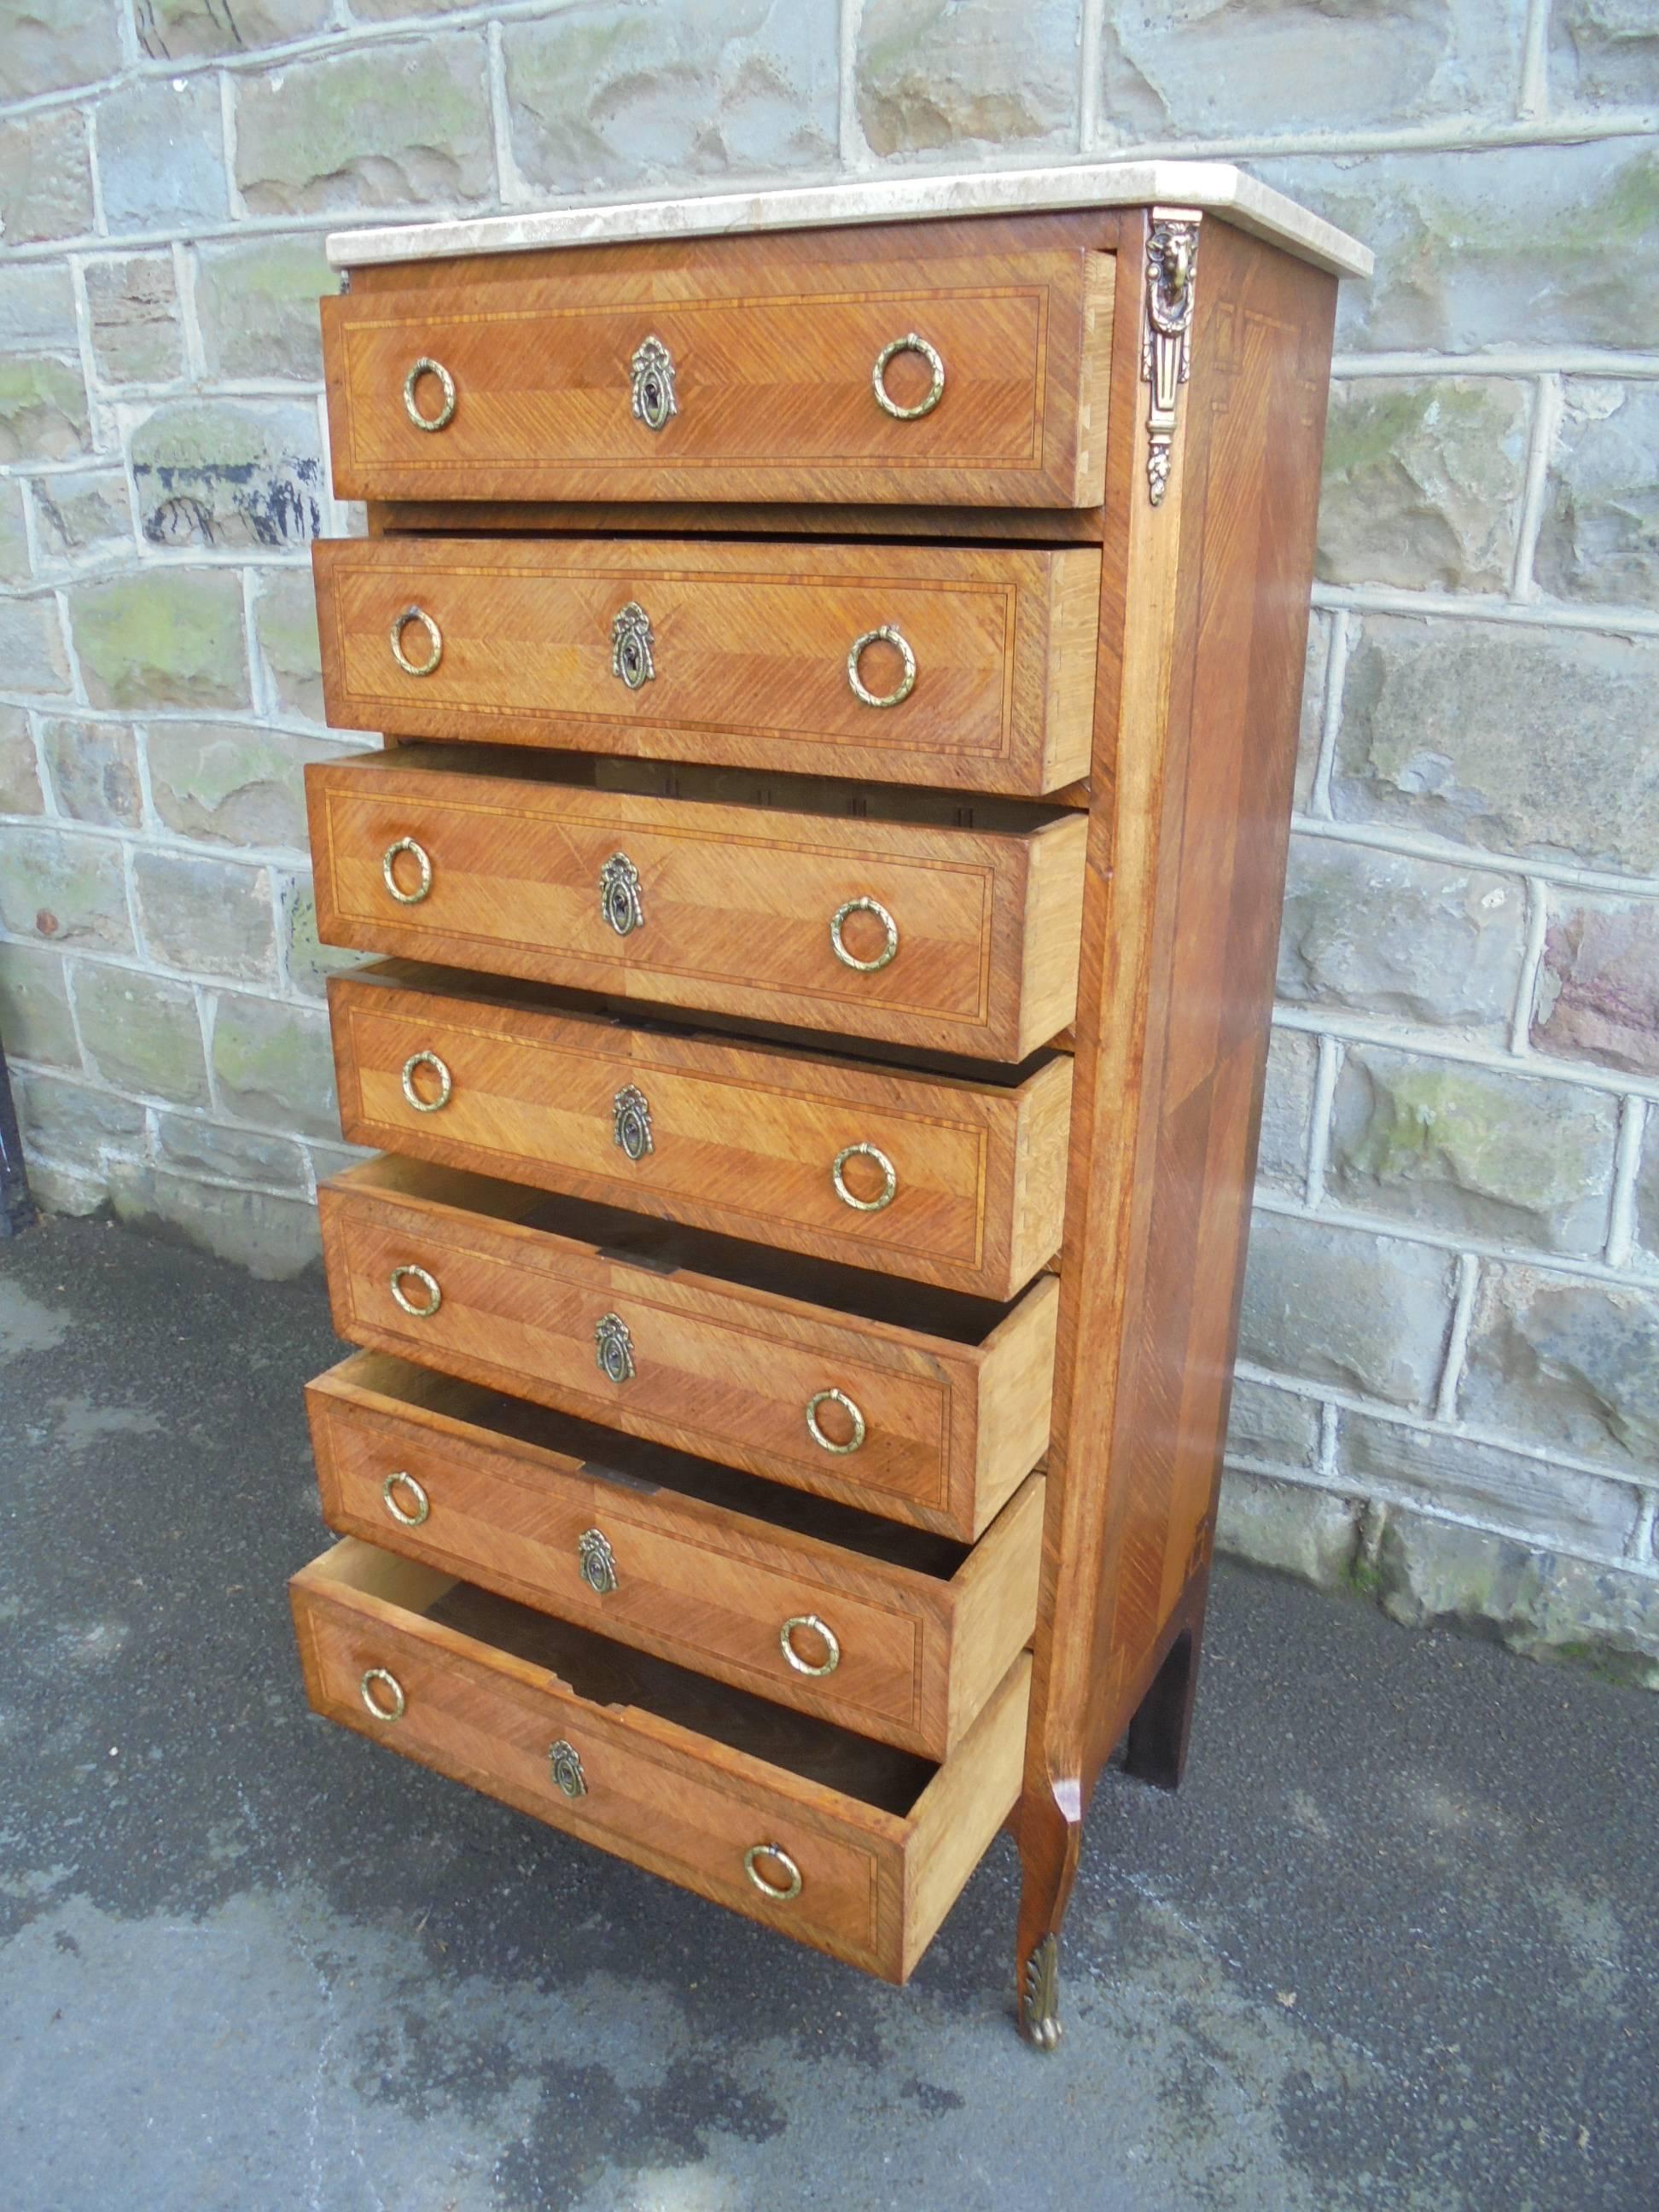 19th Century Antique Inlaid Kingwood Marble-Top Chest with Seven Draws For Sale